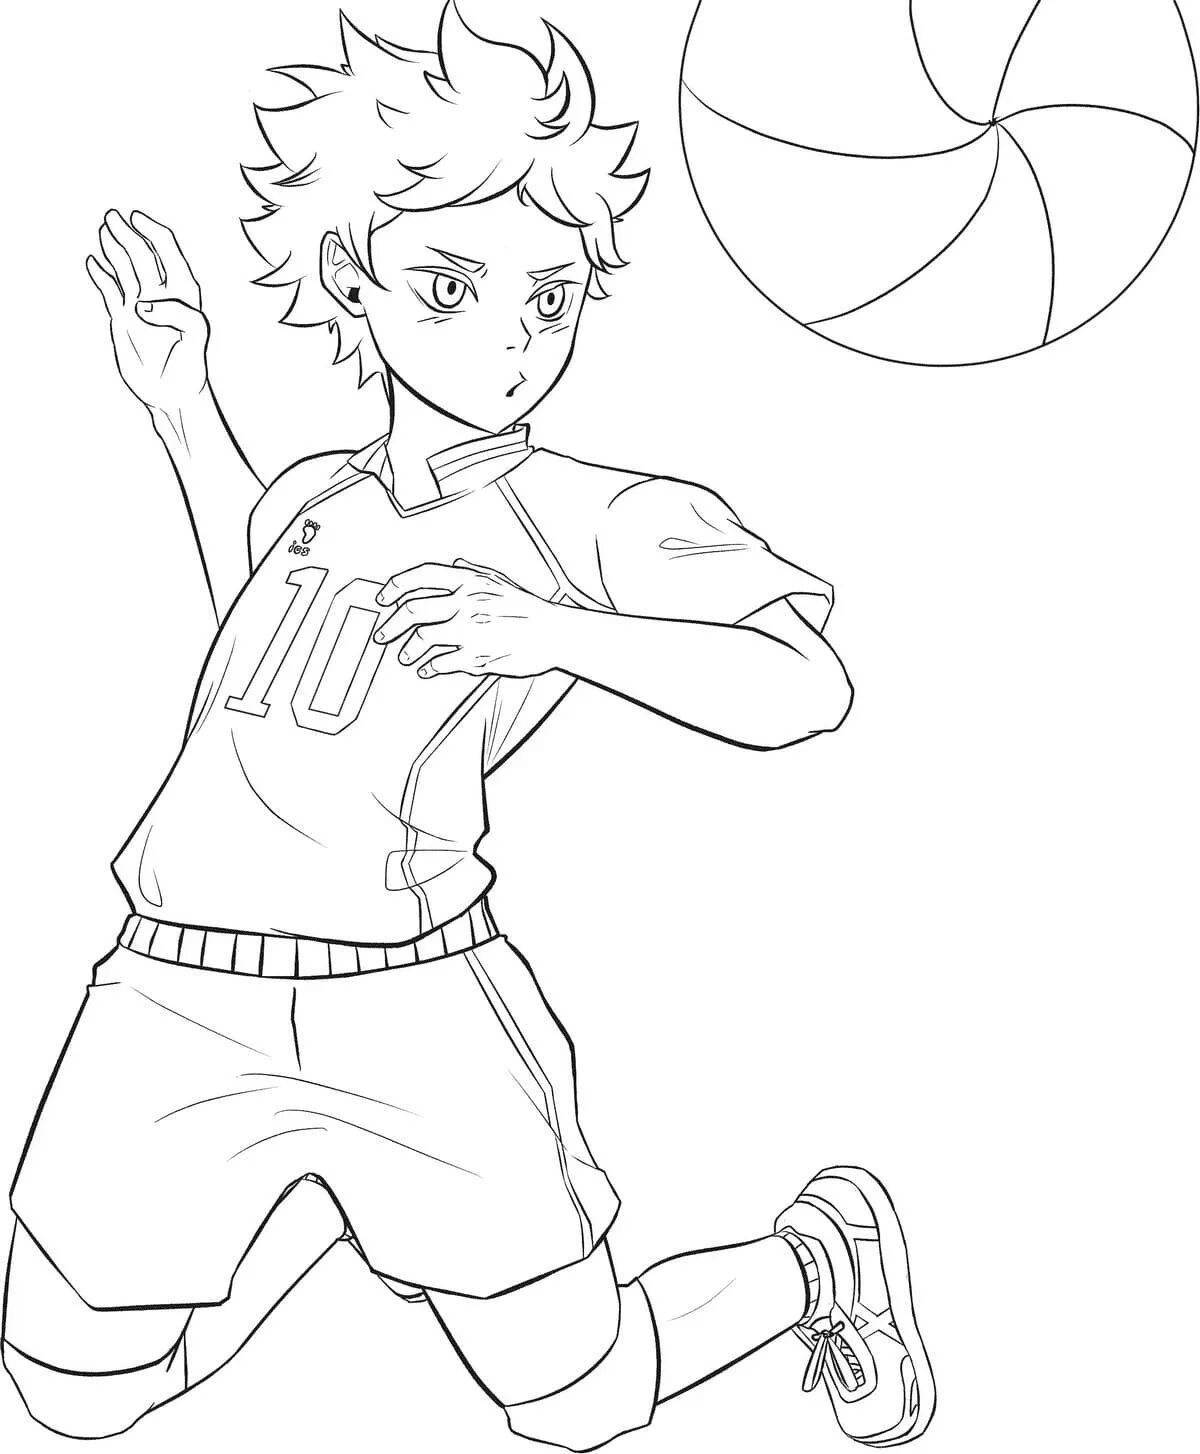 Hinata's exquisite shoes coloring page